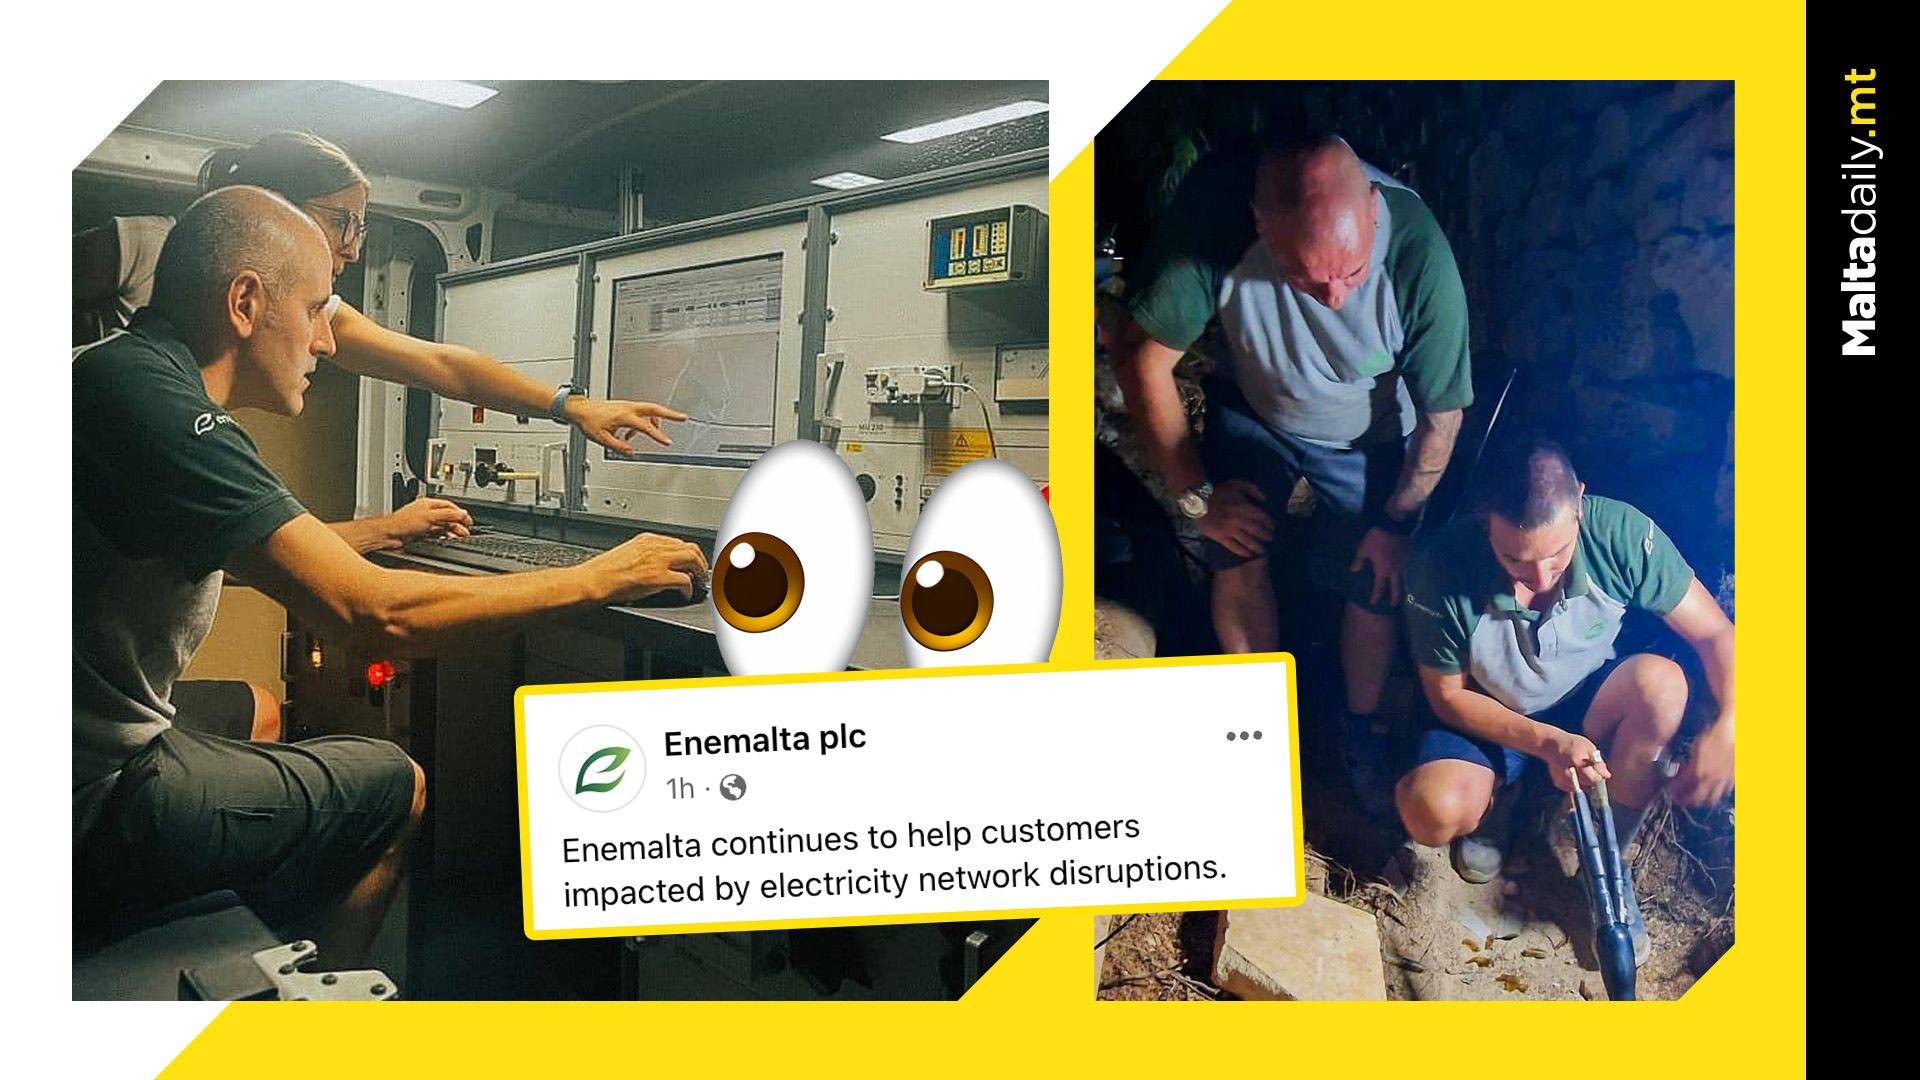 Malta Braves Fifth Day Of Power Cuts As Enemalta Tries To Keep Up